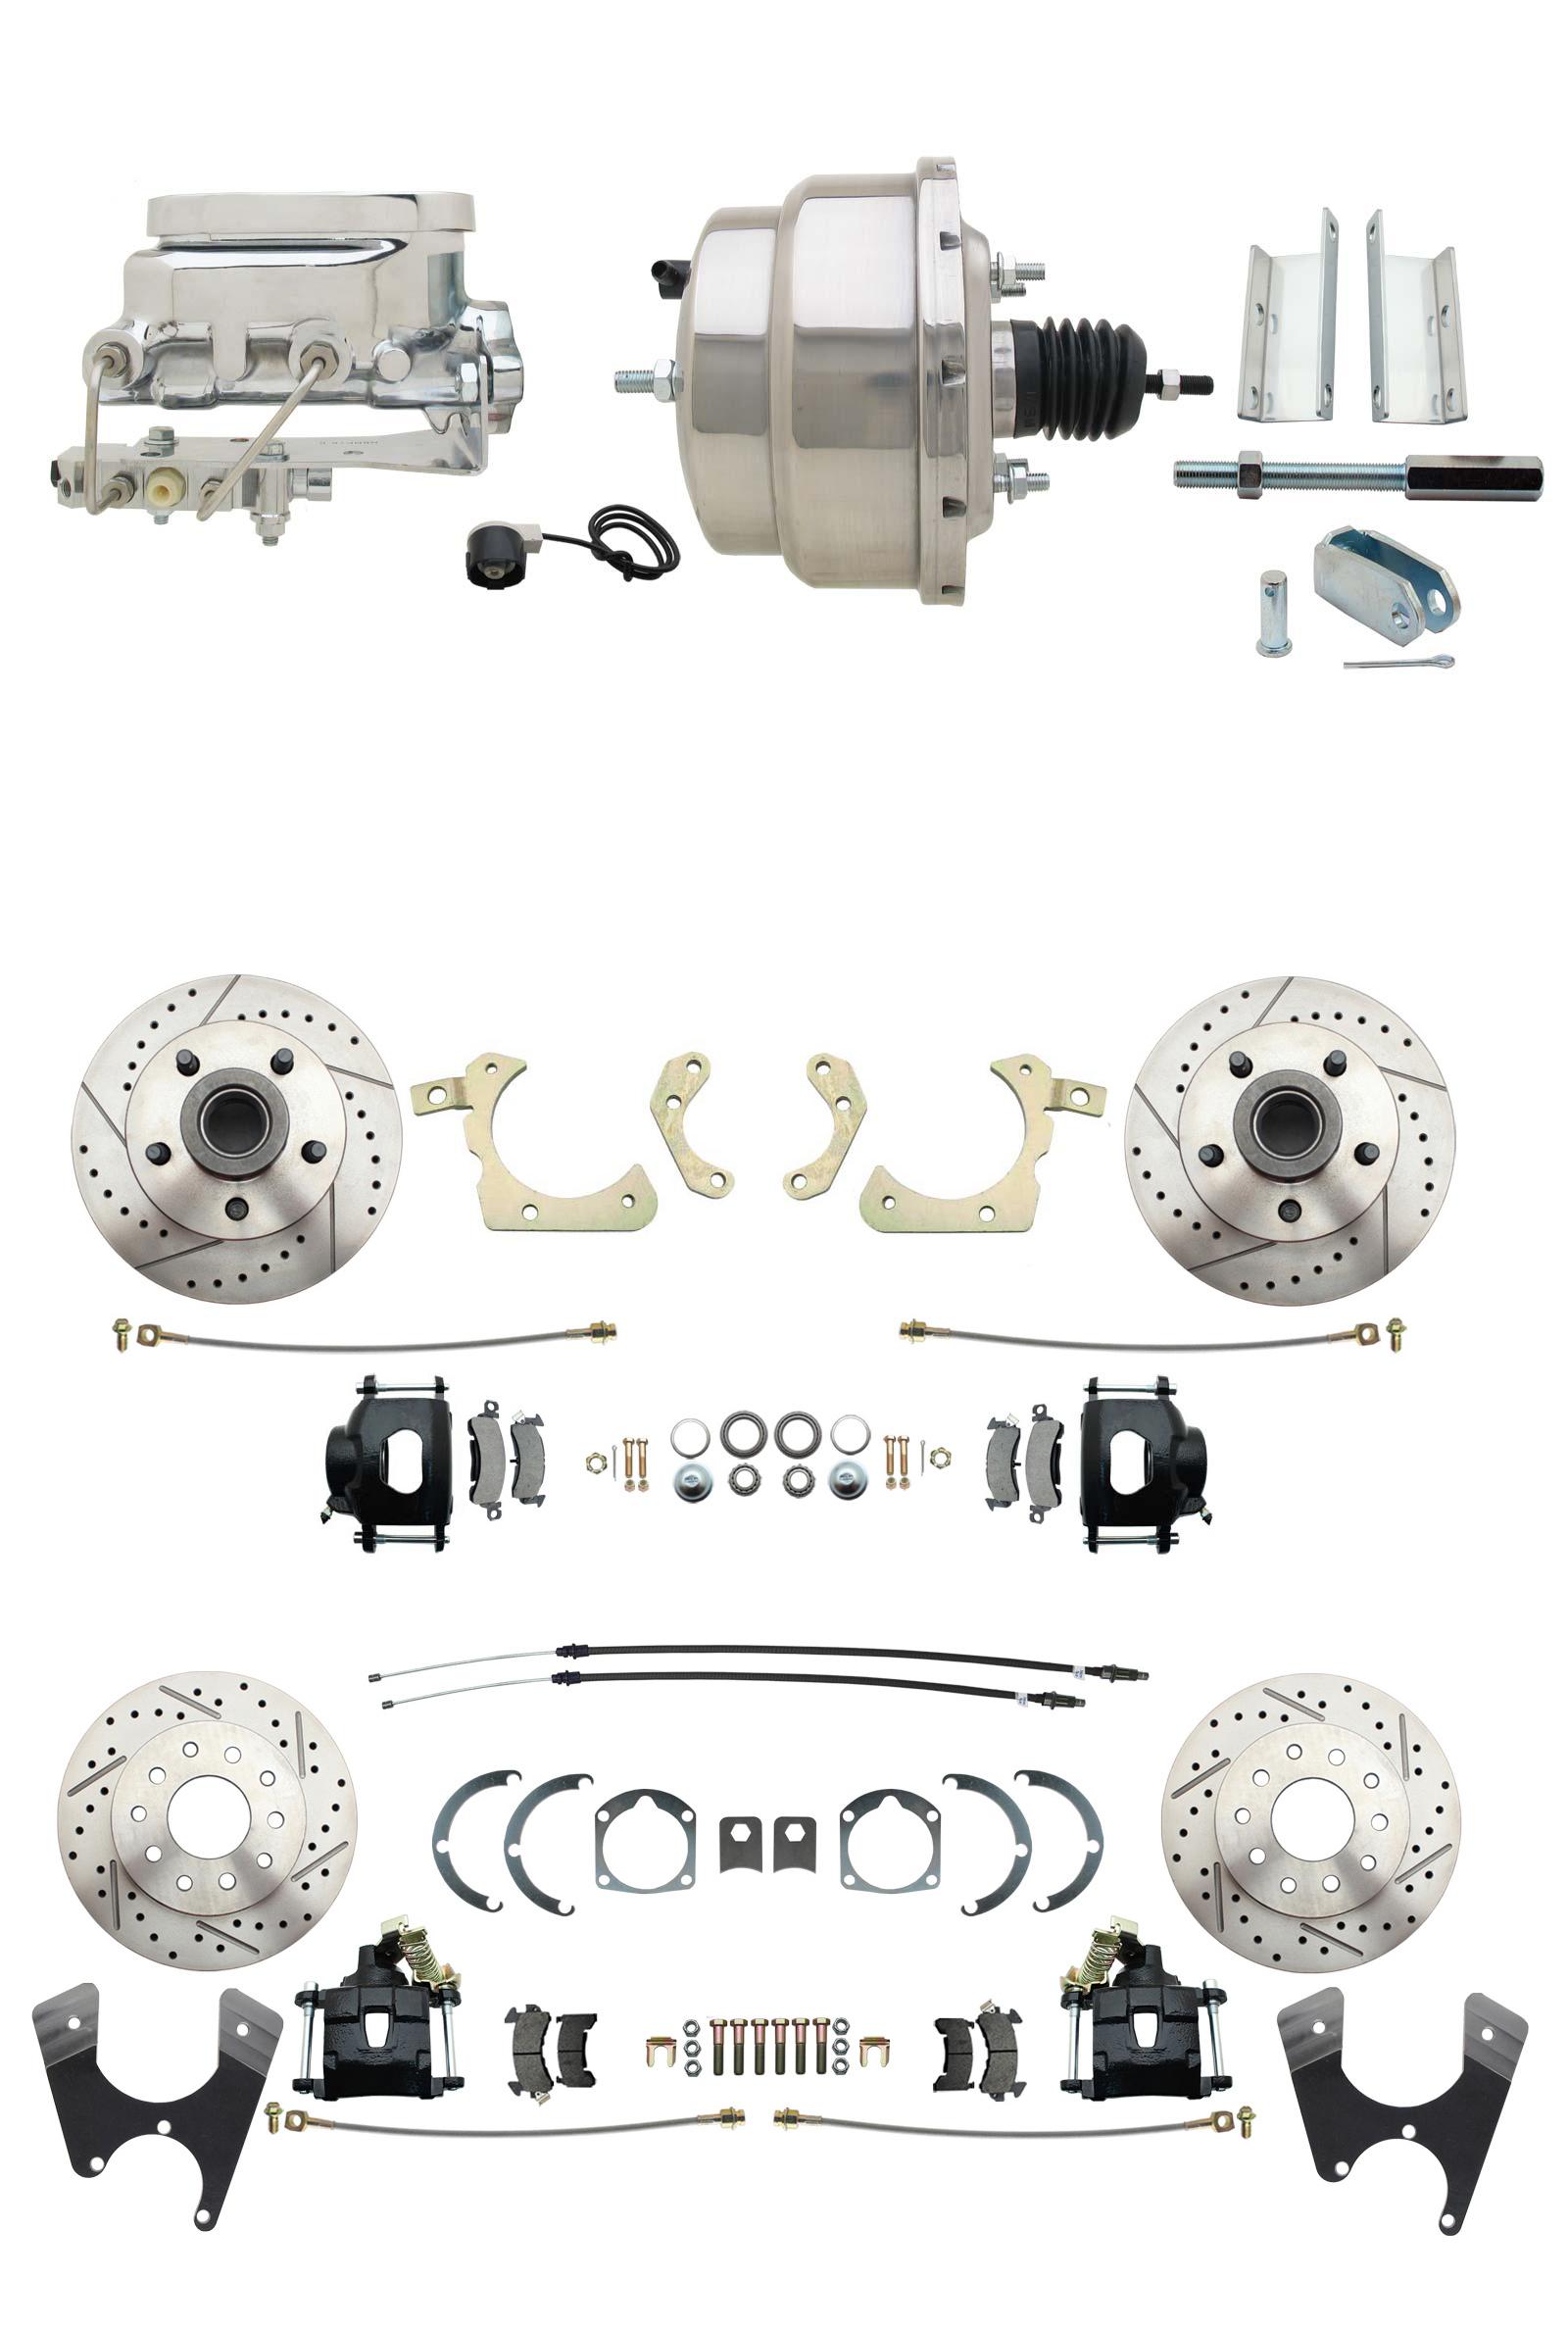 1955-1958 GM Full Size Front & Rear Power Disc Brake Kit Black Powder Coated Calipers Drilled/Slotted Rotors (Impala, Bel Air, Biscayne) & 8 Dual Chrome Booster Conversion Kit W/ Flat Top Chrome Master Cylinder Bottom M